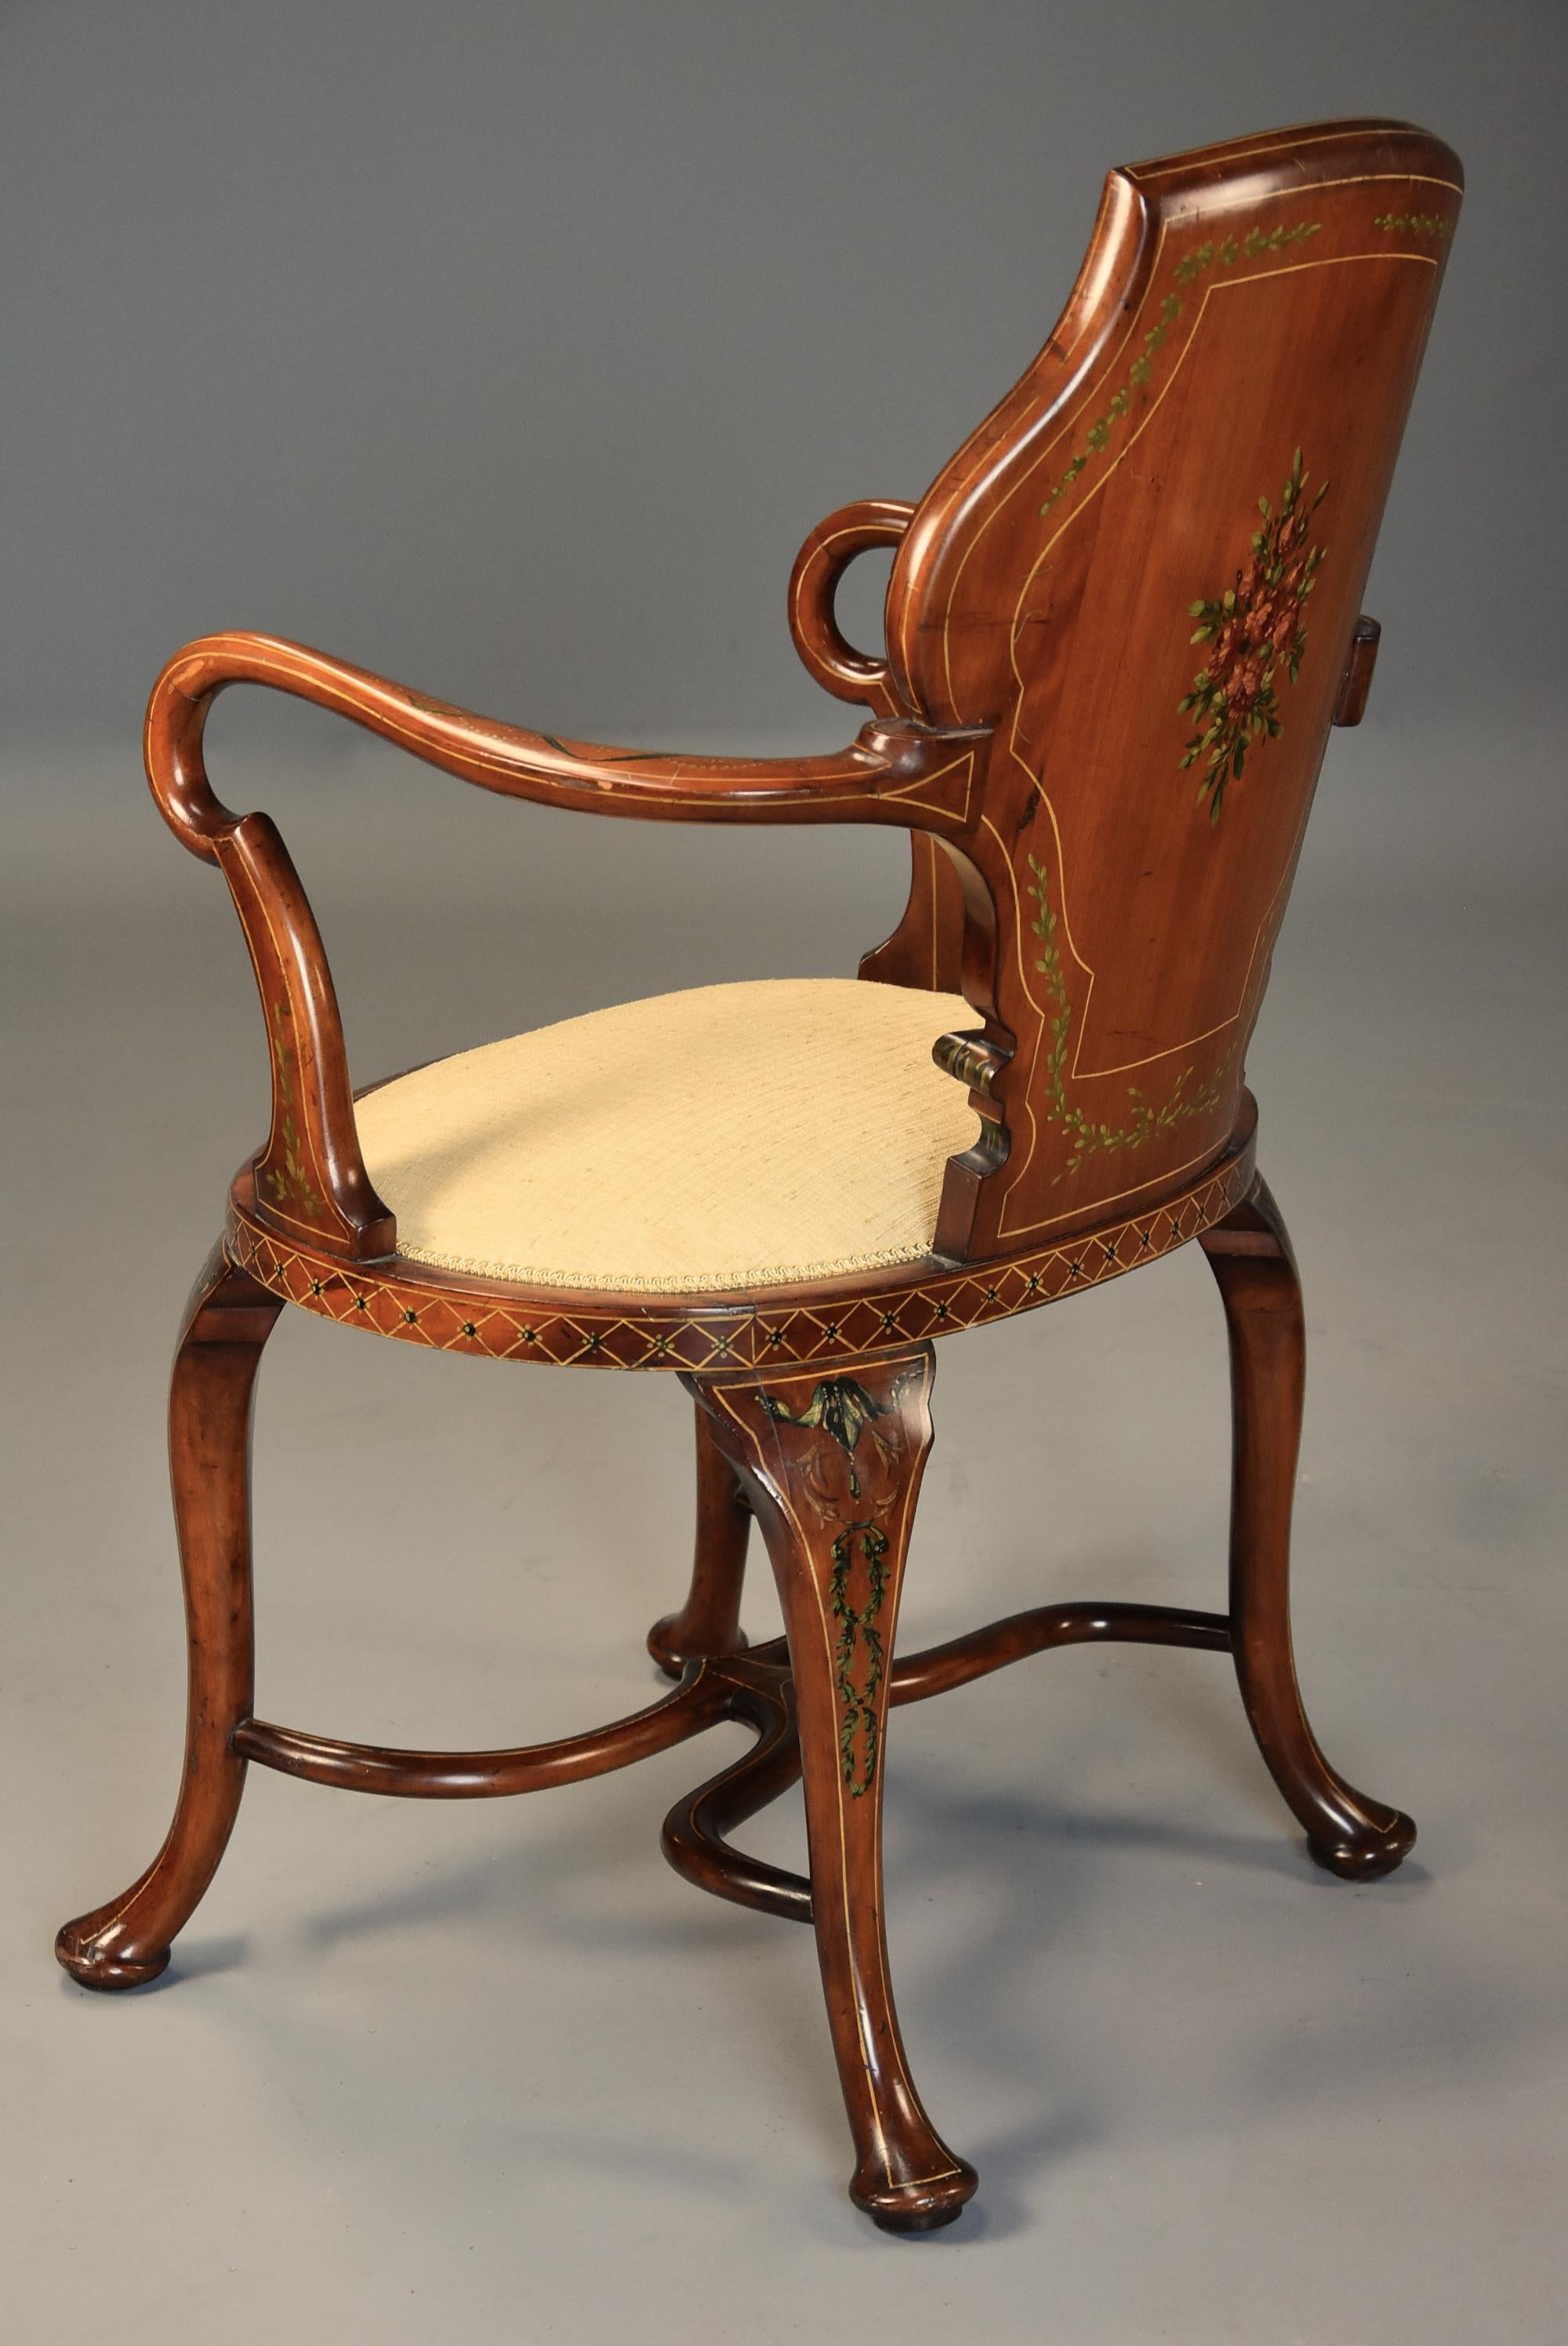 Highly Decorative Edwardian Satinwood and Painted Armchair in the Georgian Style For Sale 2